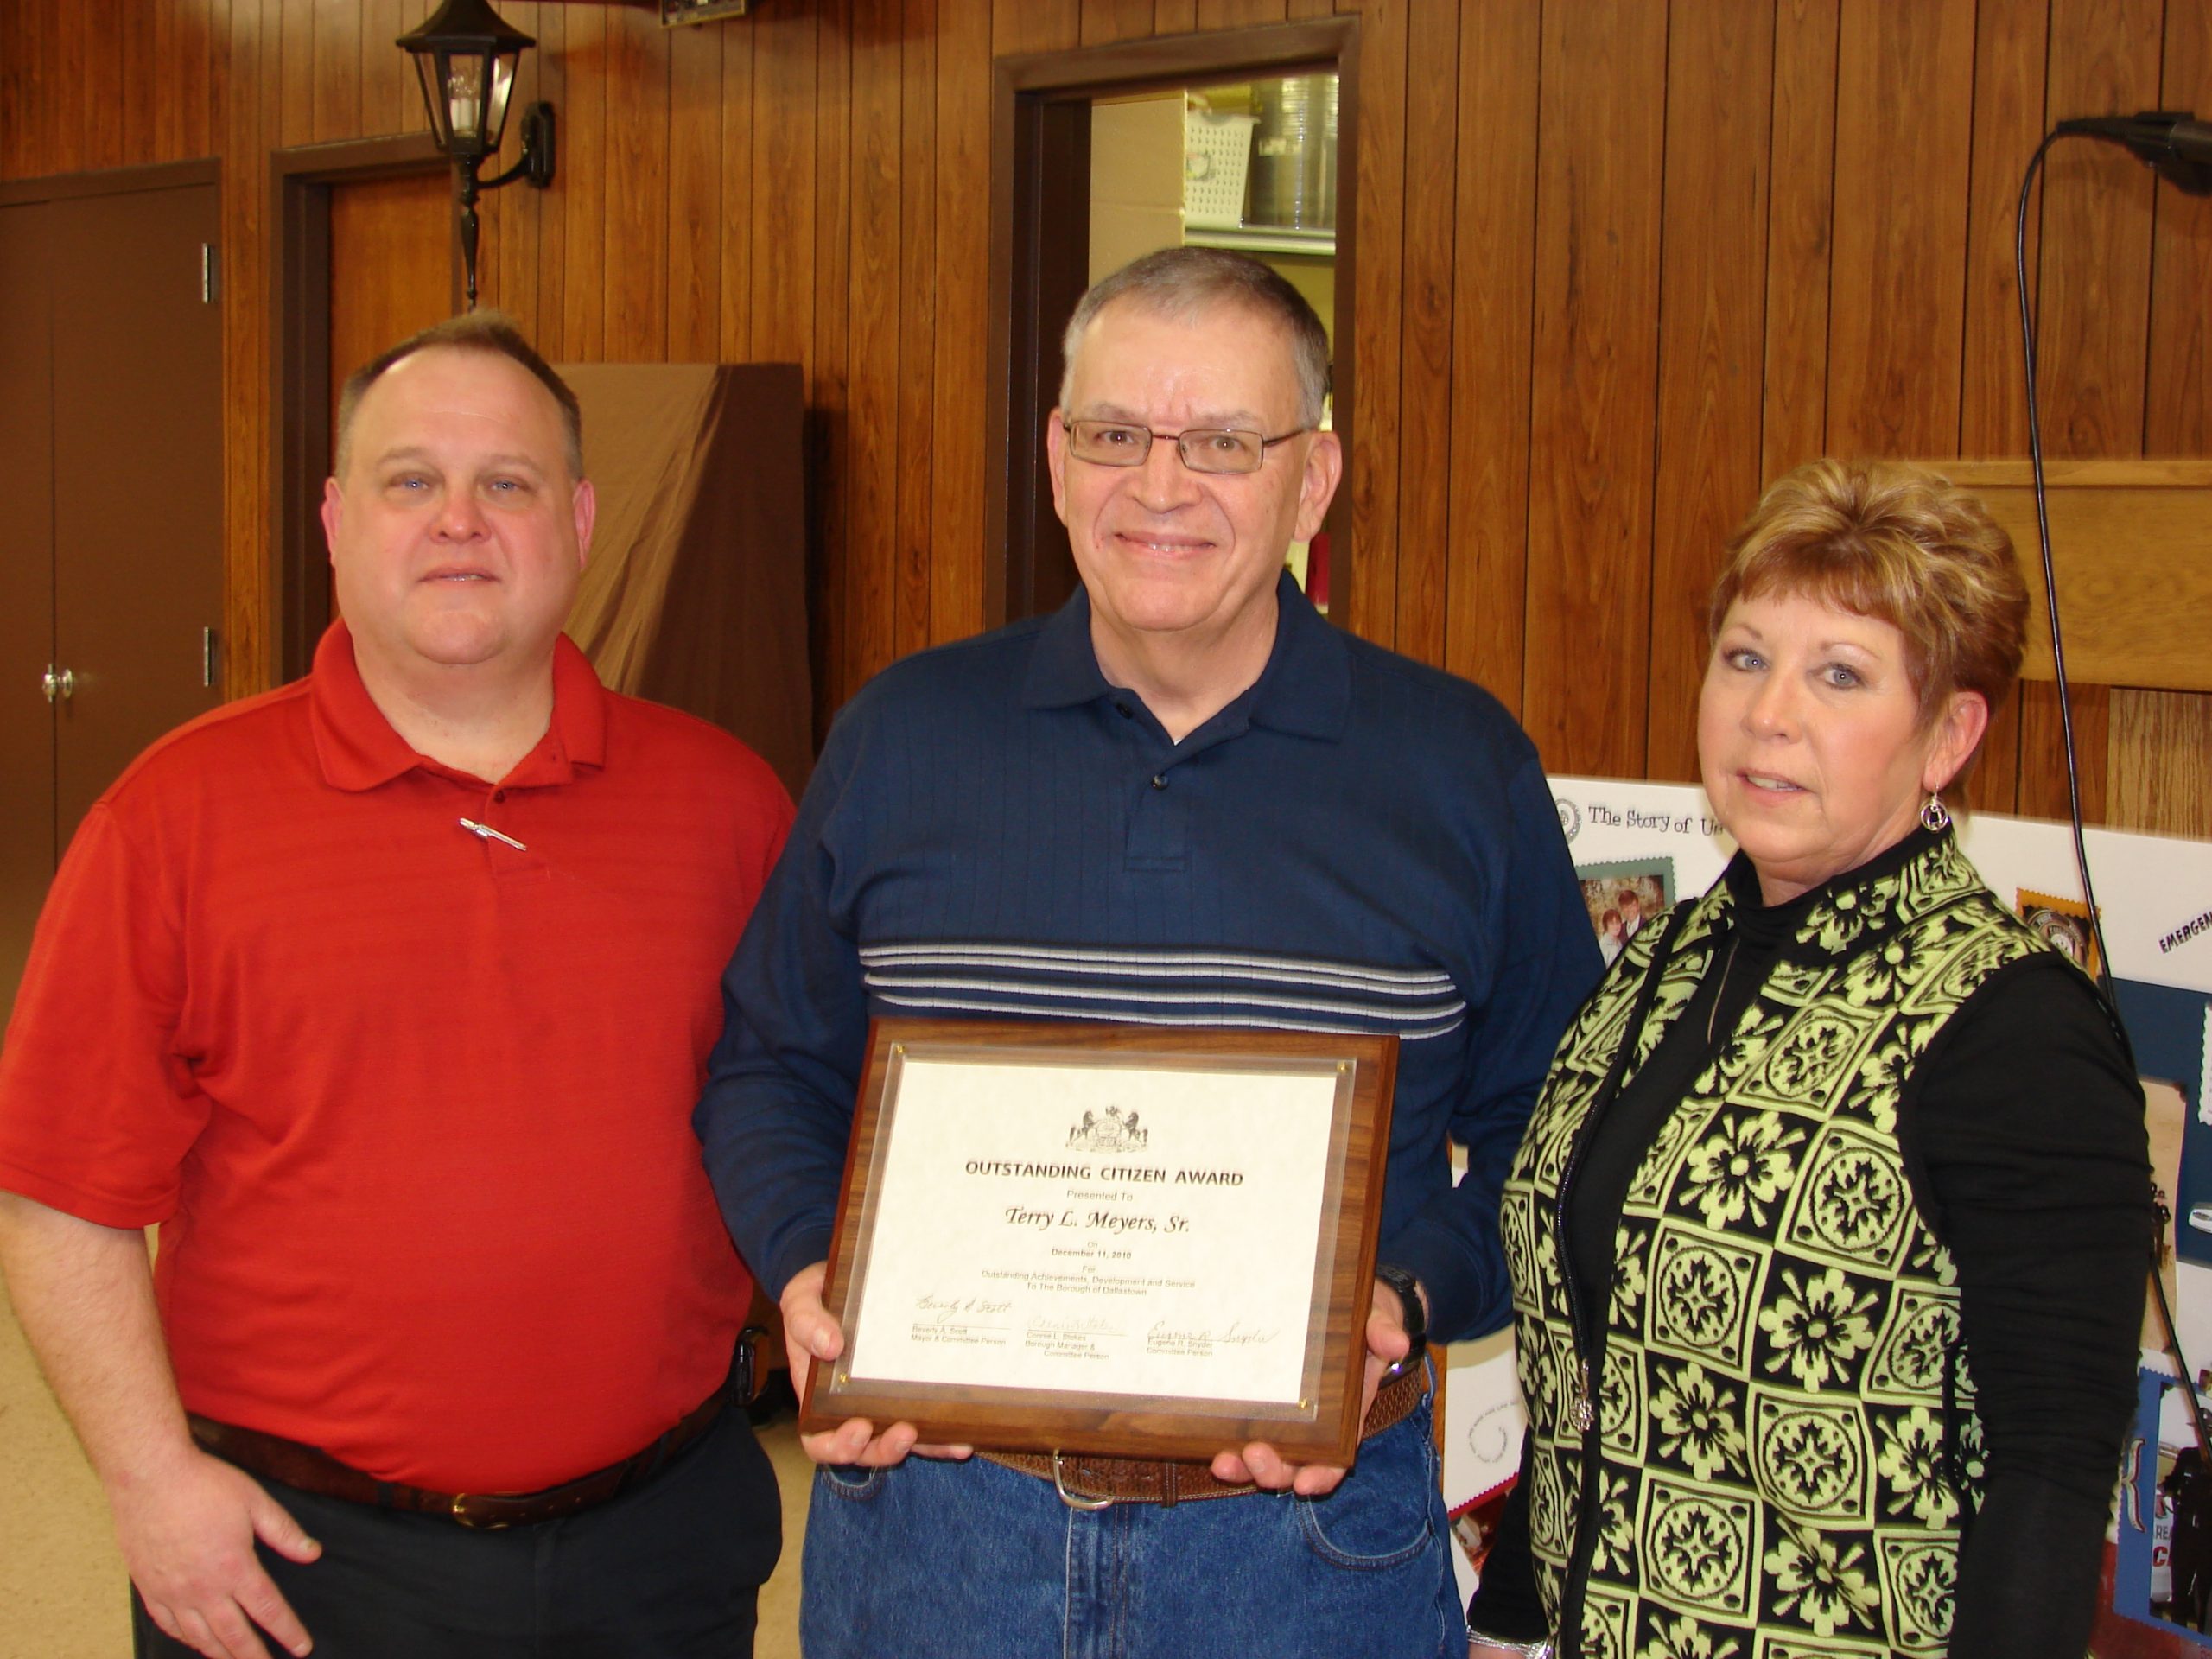 Mayor Terry Meyers (middle) receiving the 2010 Outstanding Citizen Award, Council President Ron Smith (left), Borough Manager Connie Stokes (right)